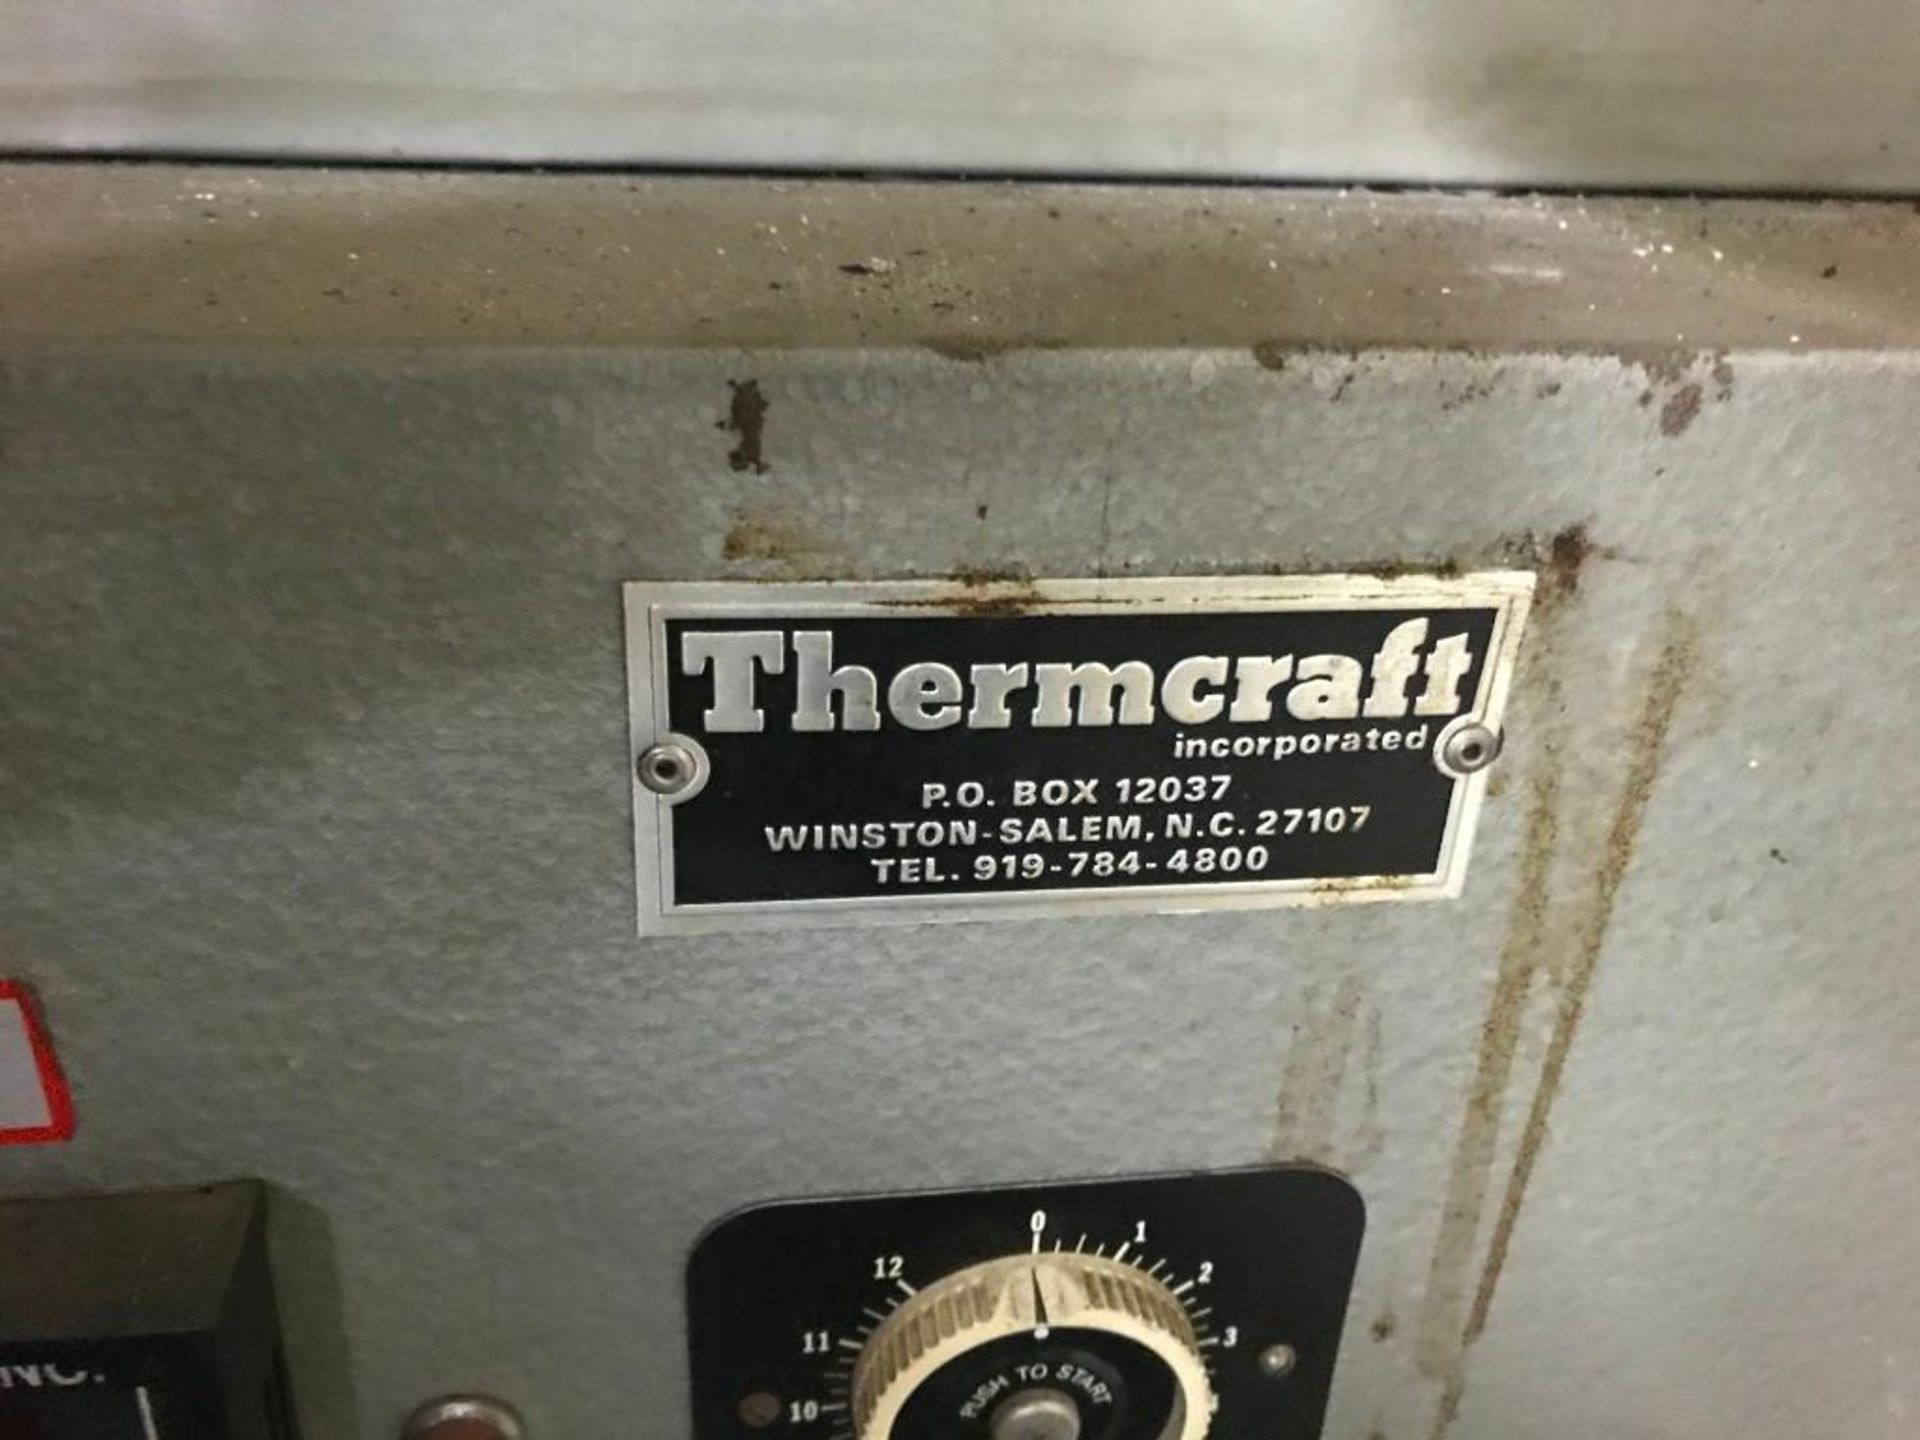 THERMACRAFT 12-8-17-DW BOX FURNACE - Image 4 of 9